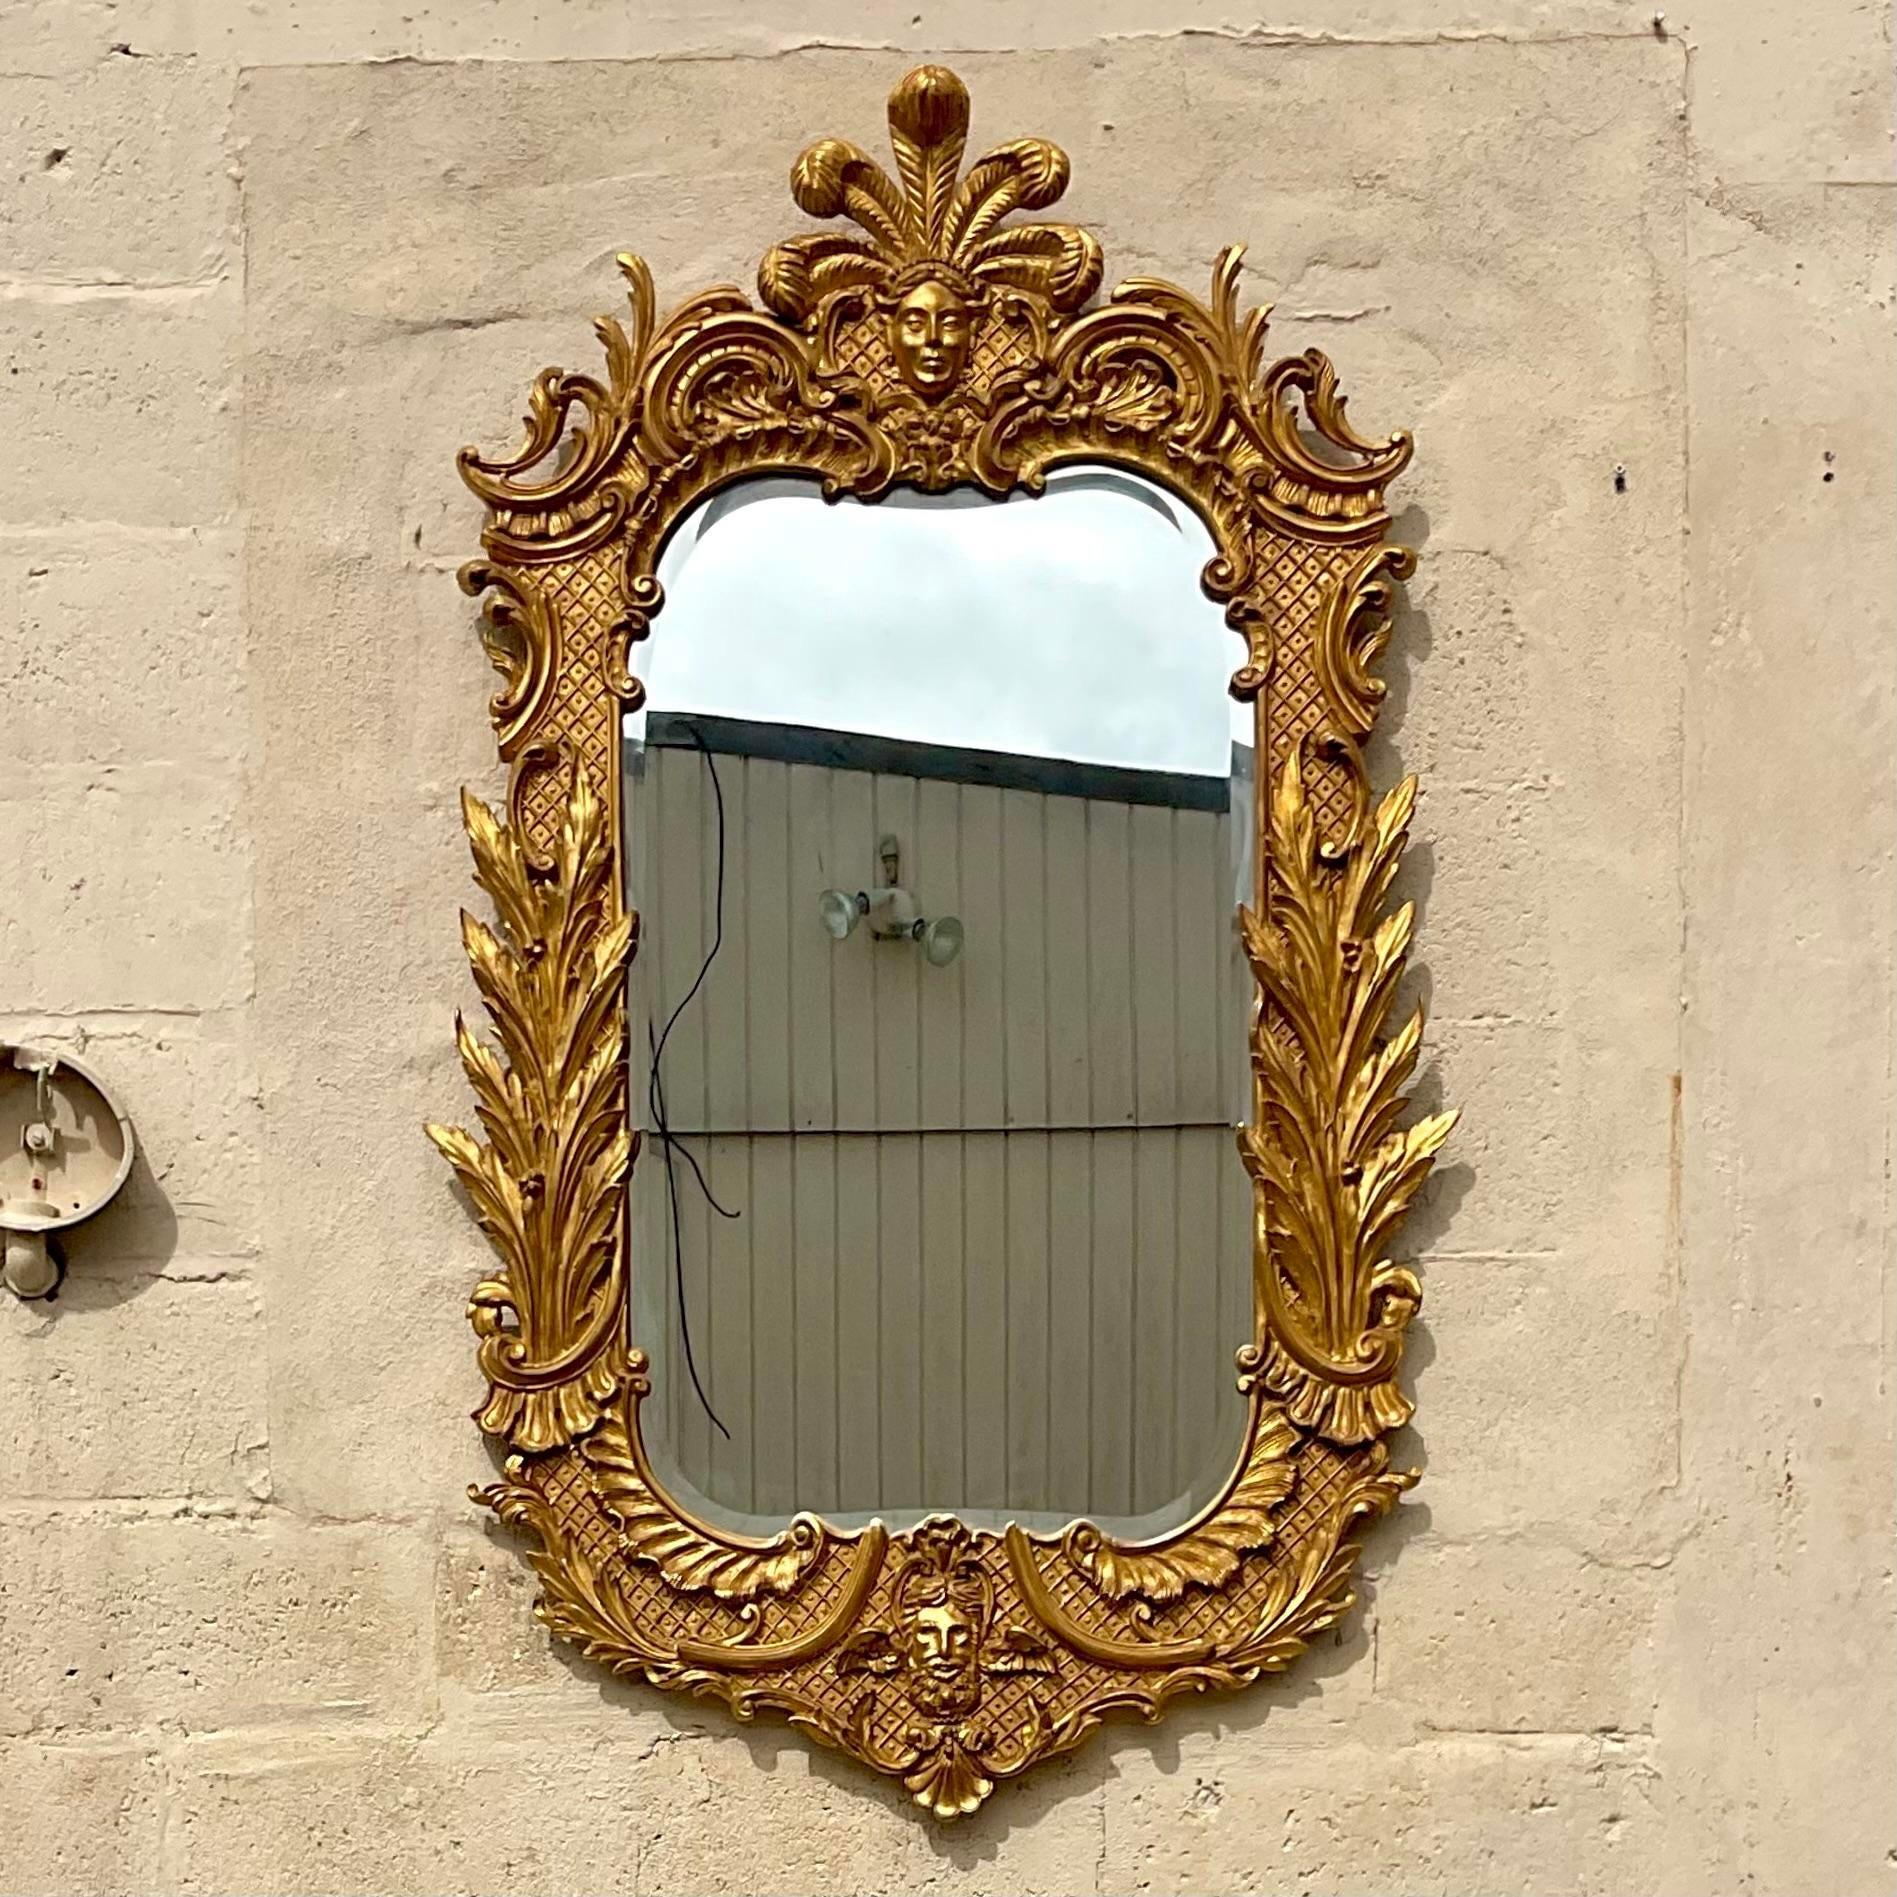 A fantastic vintage Regency wall mirror. A chic gilt plumed monarch carved from wood. Made in Italy. Done in the manner of Carvers Guild. Acquired from a Palm Beach estate.